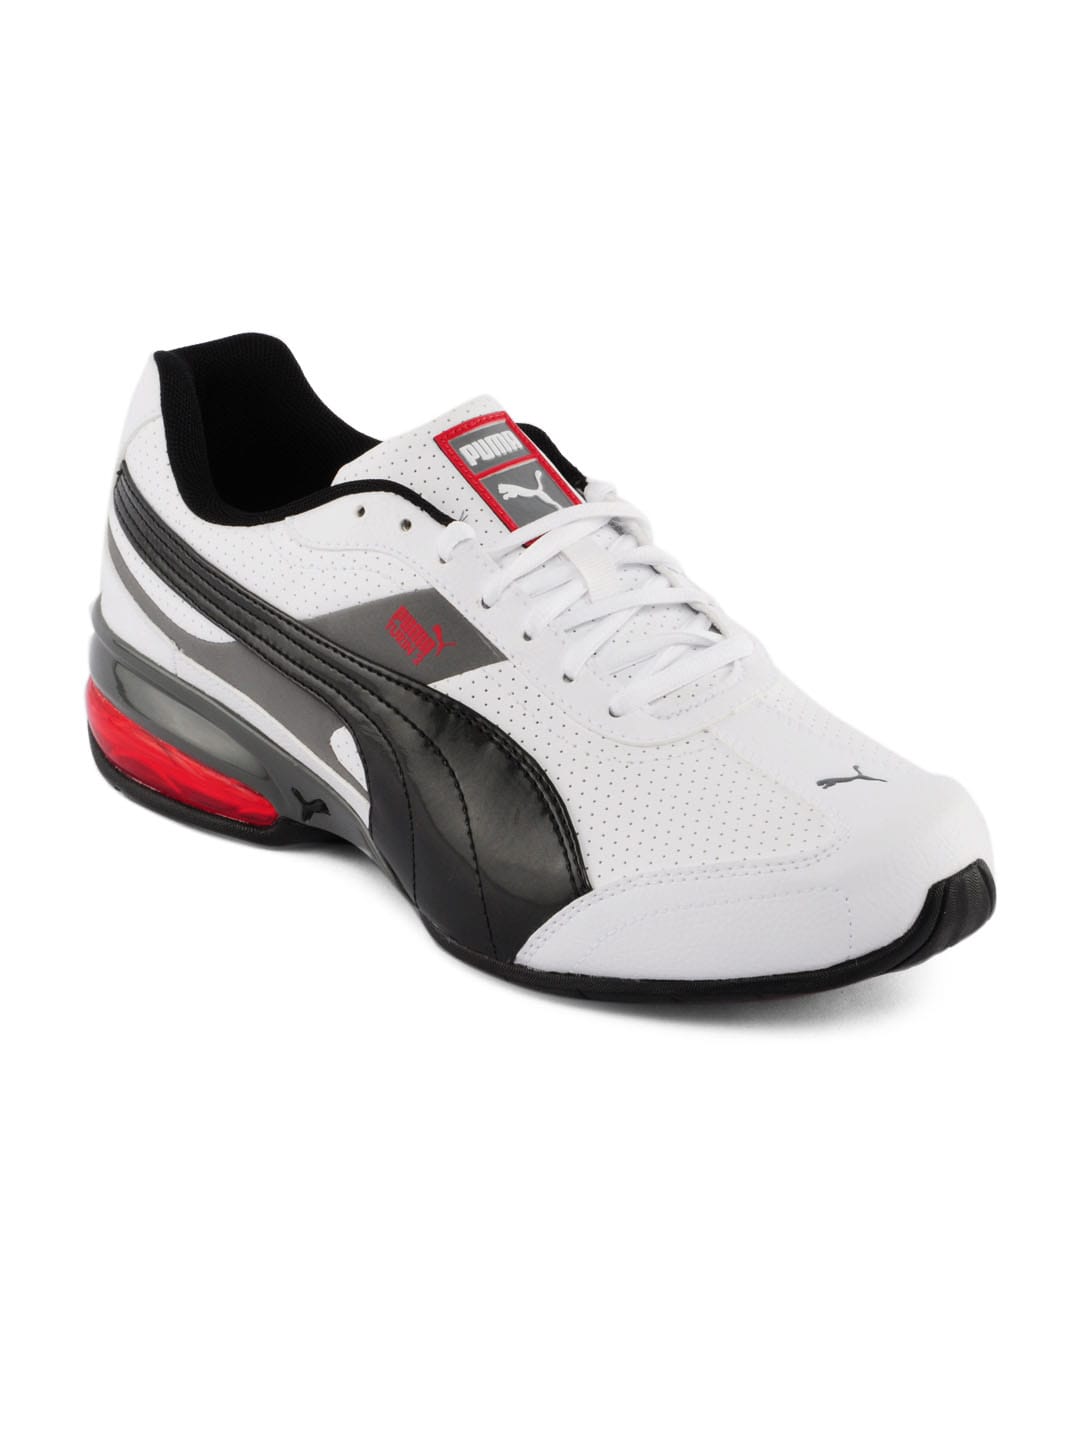 Puma Men Cell Turin Perf 2 White Sports Shoes